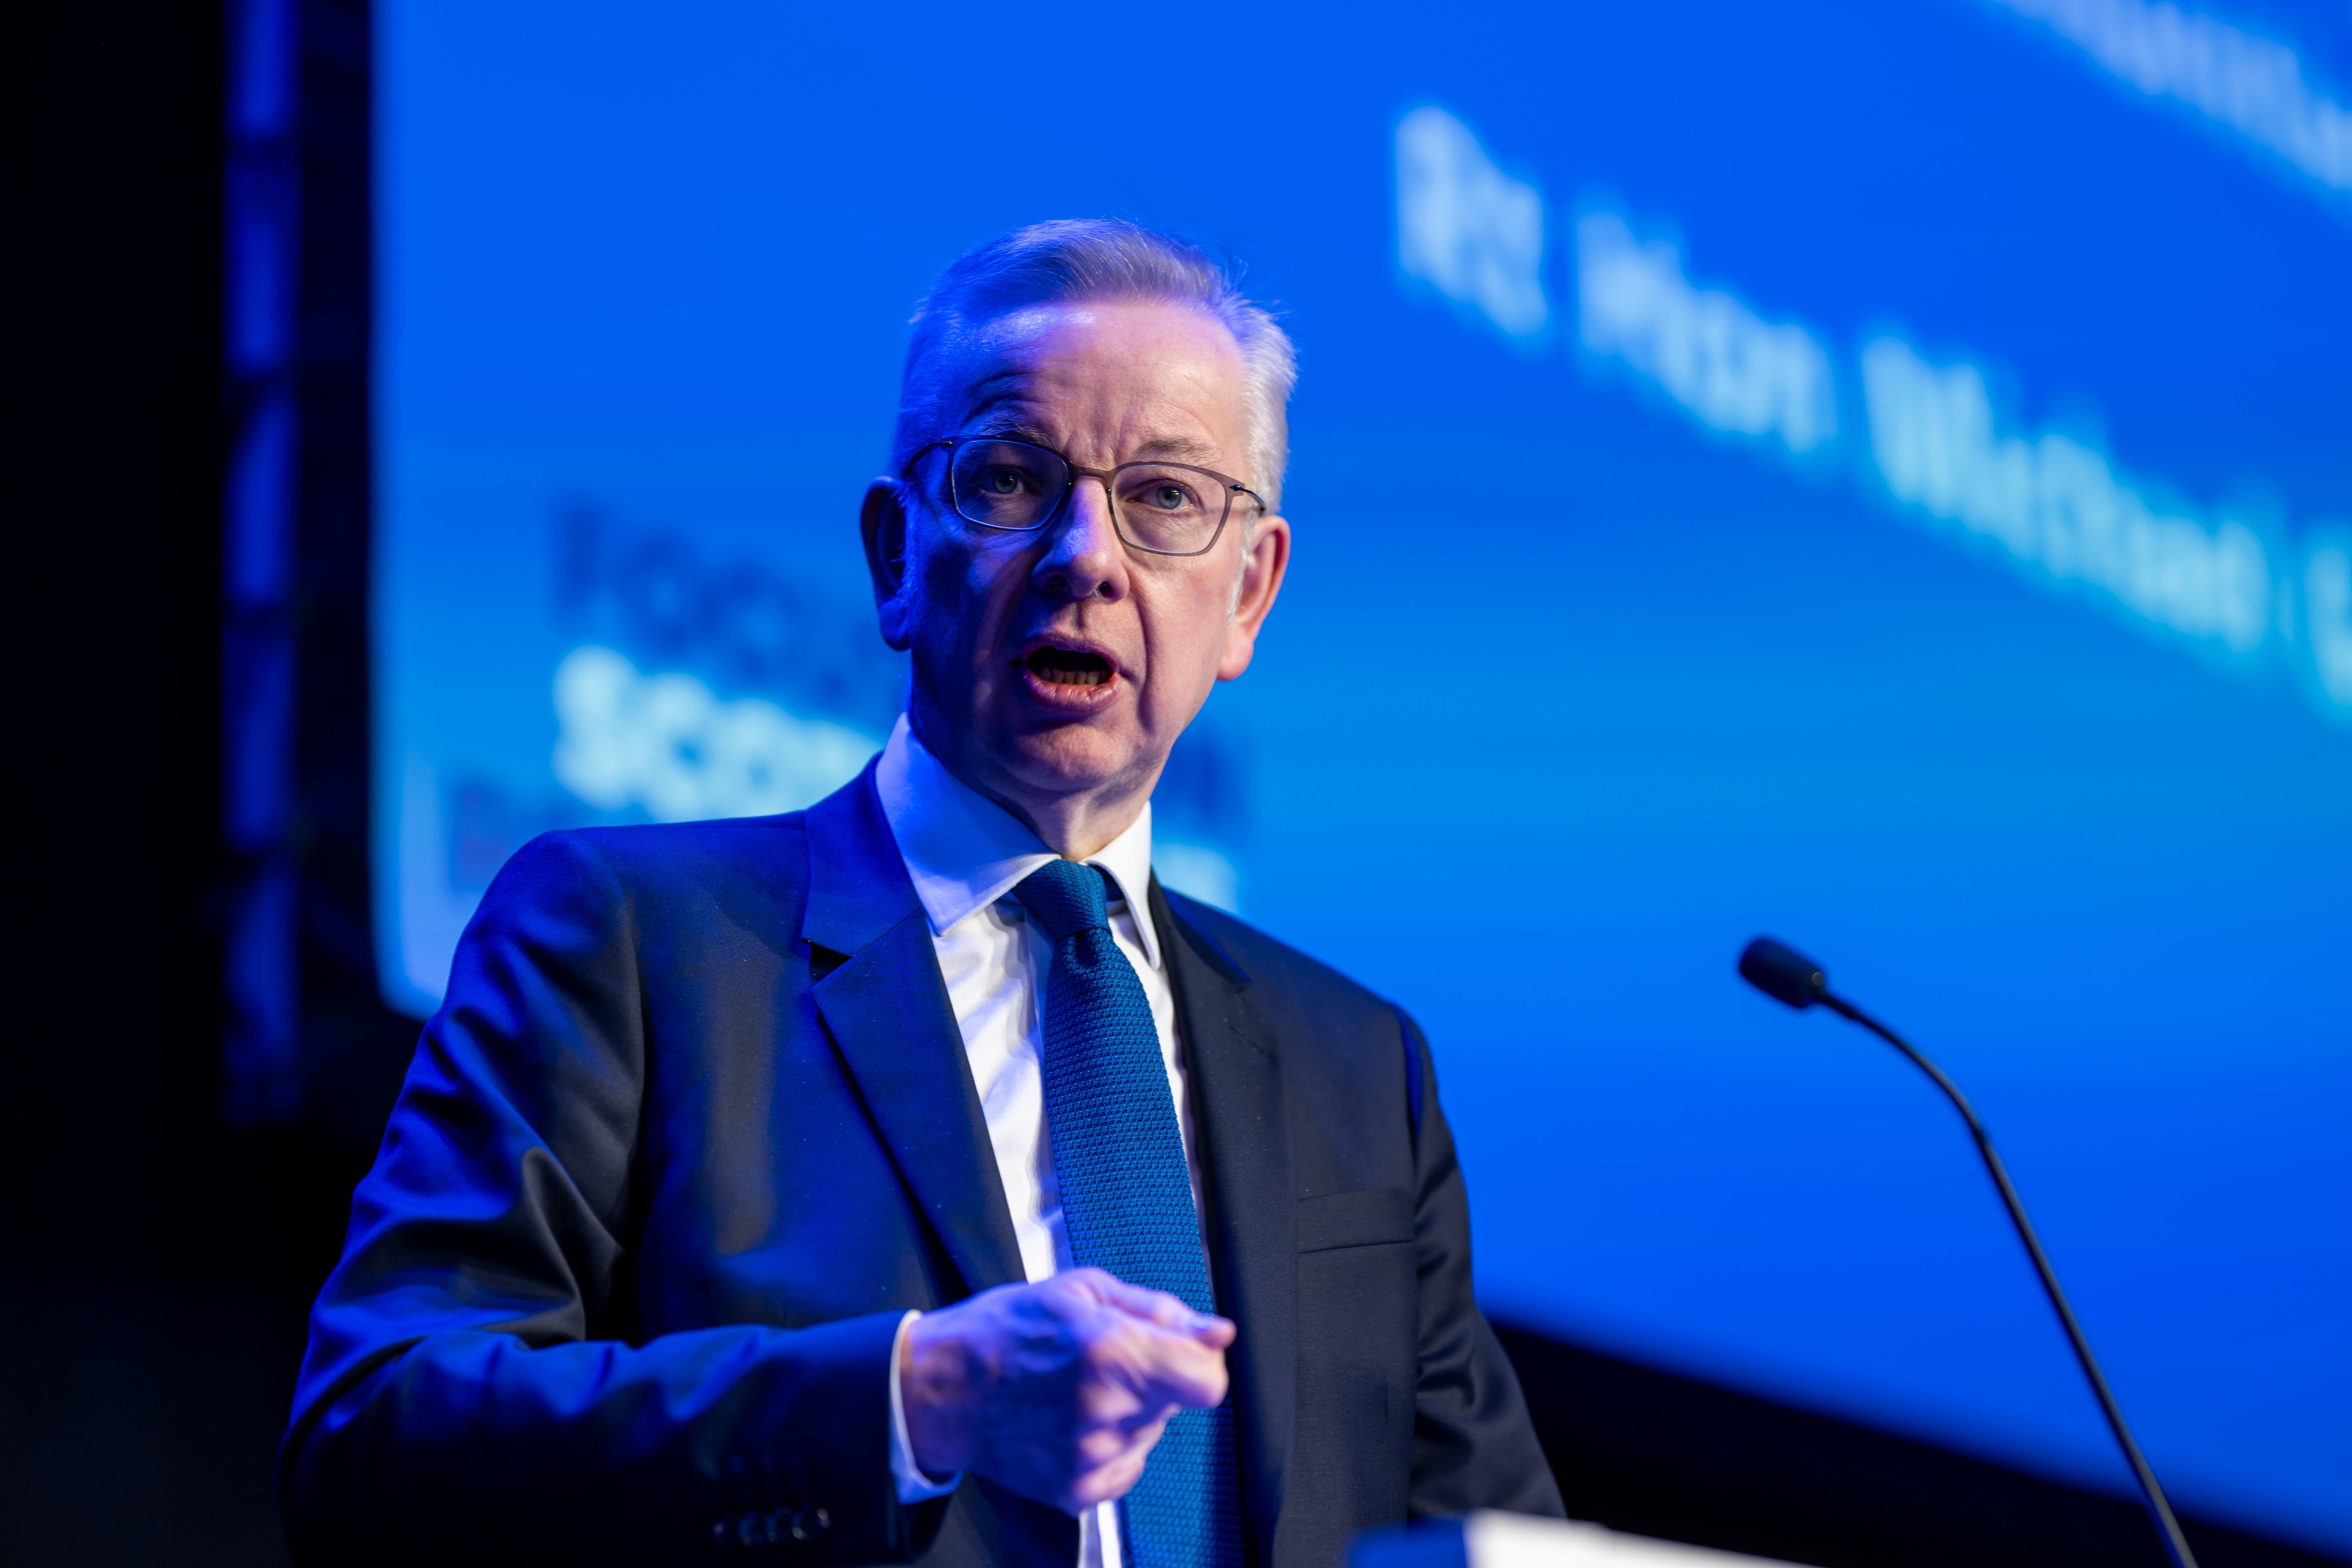 Michael Gove has been criticised for his plans which some say are a threat to freedom of expression